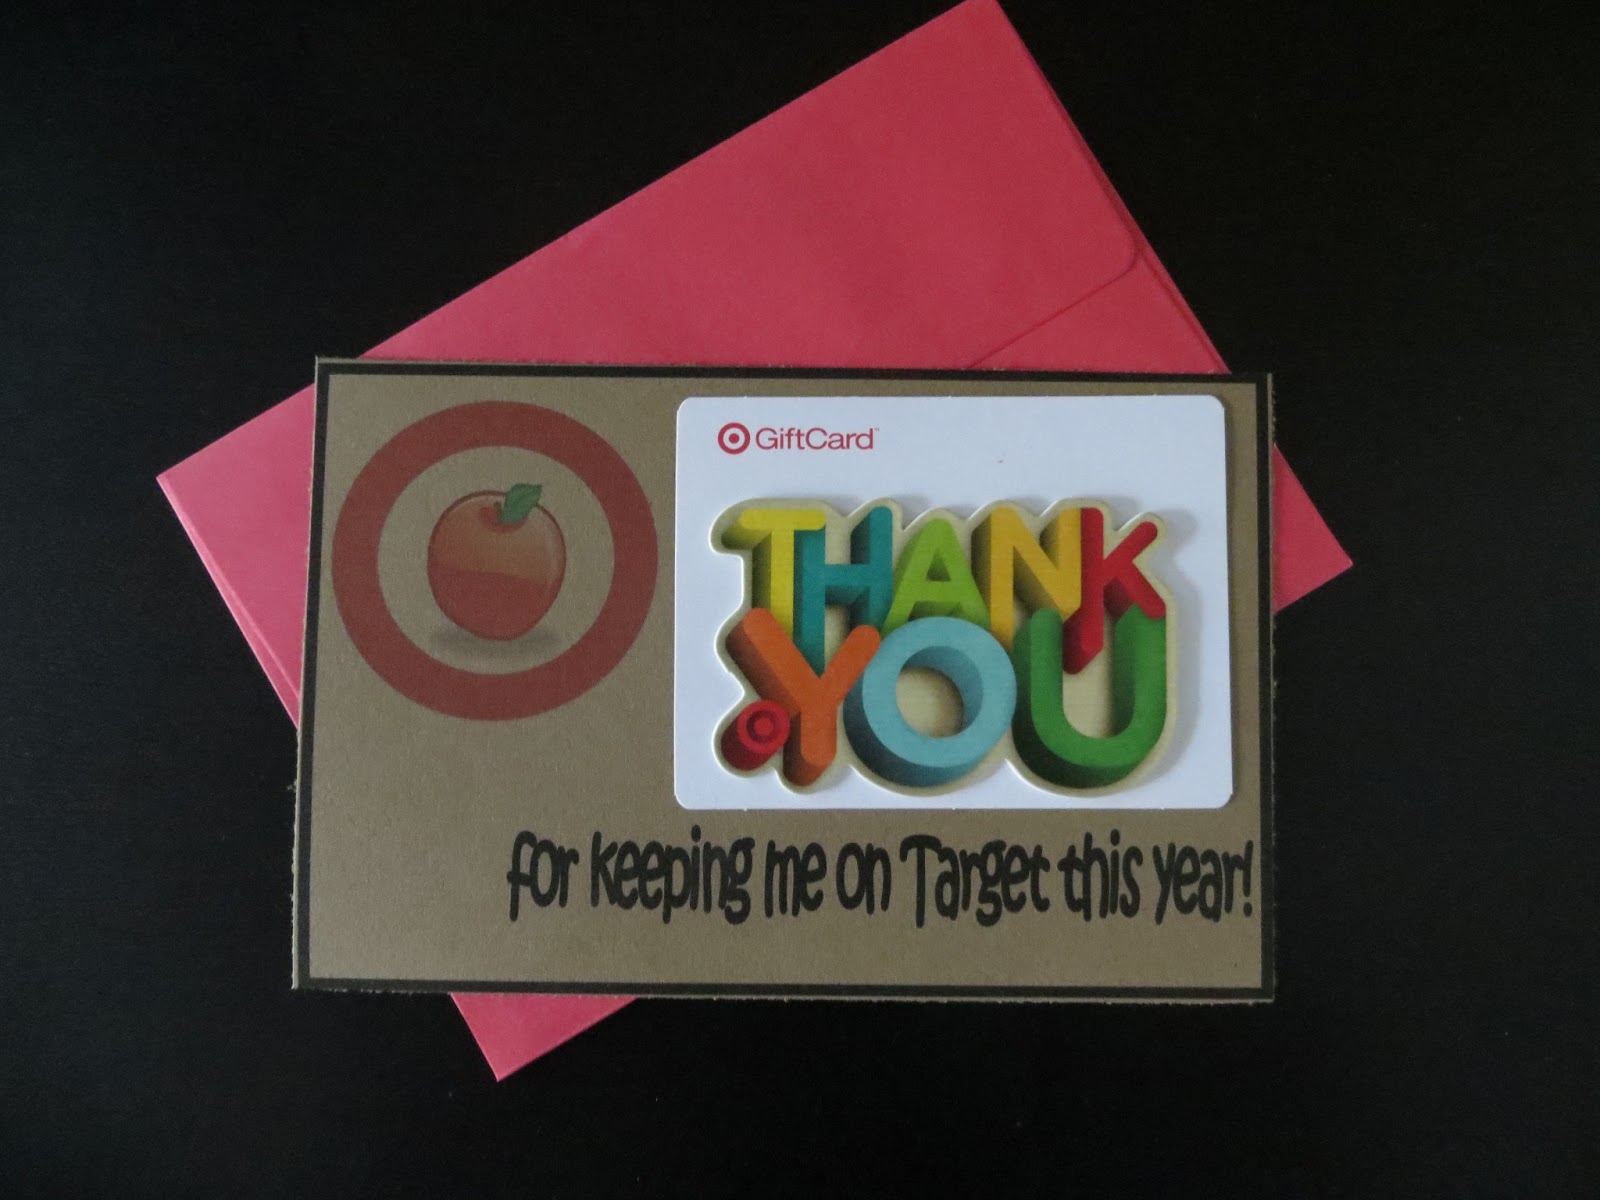 printable-thank-you-for-keeping-me-on-target-this-year-gift-card-holde